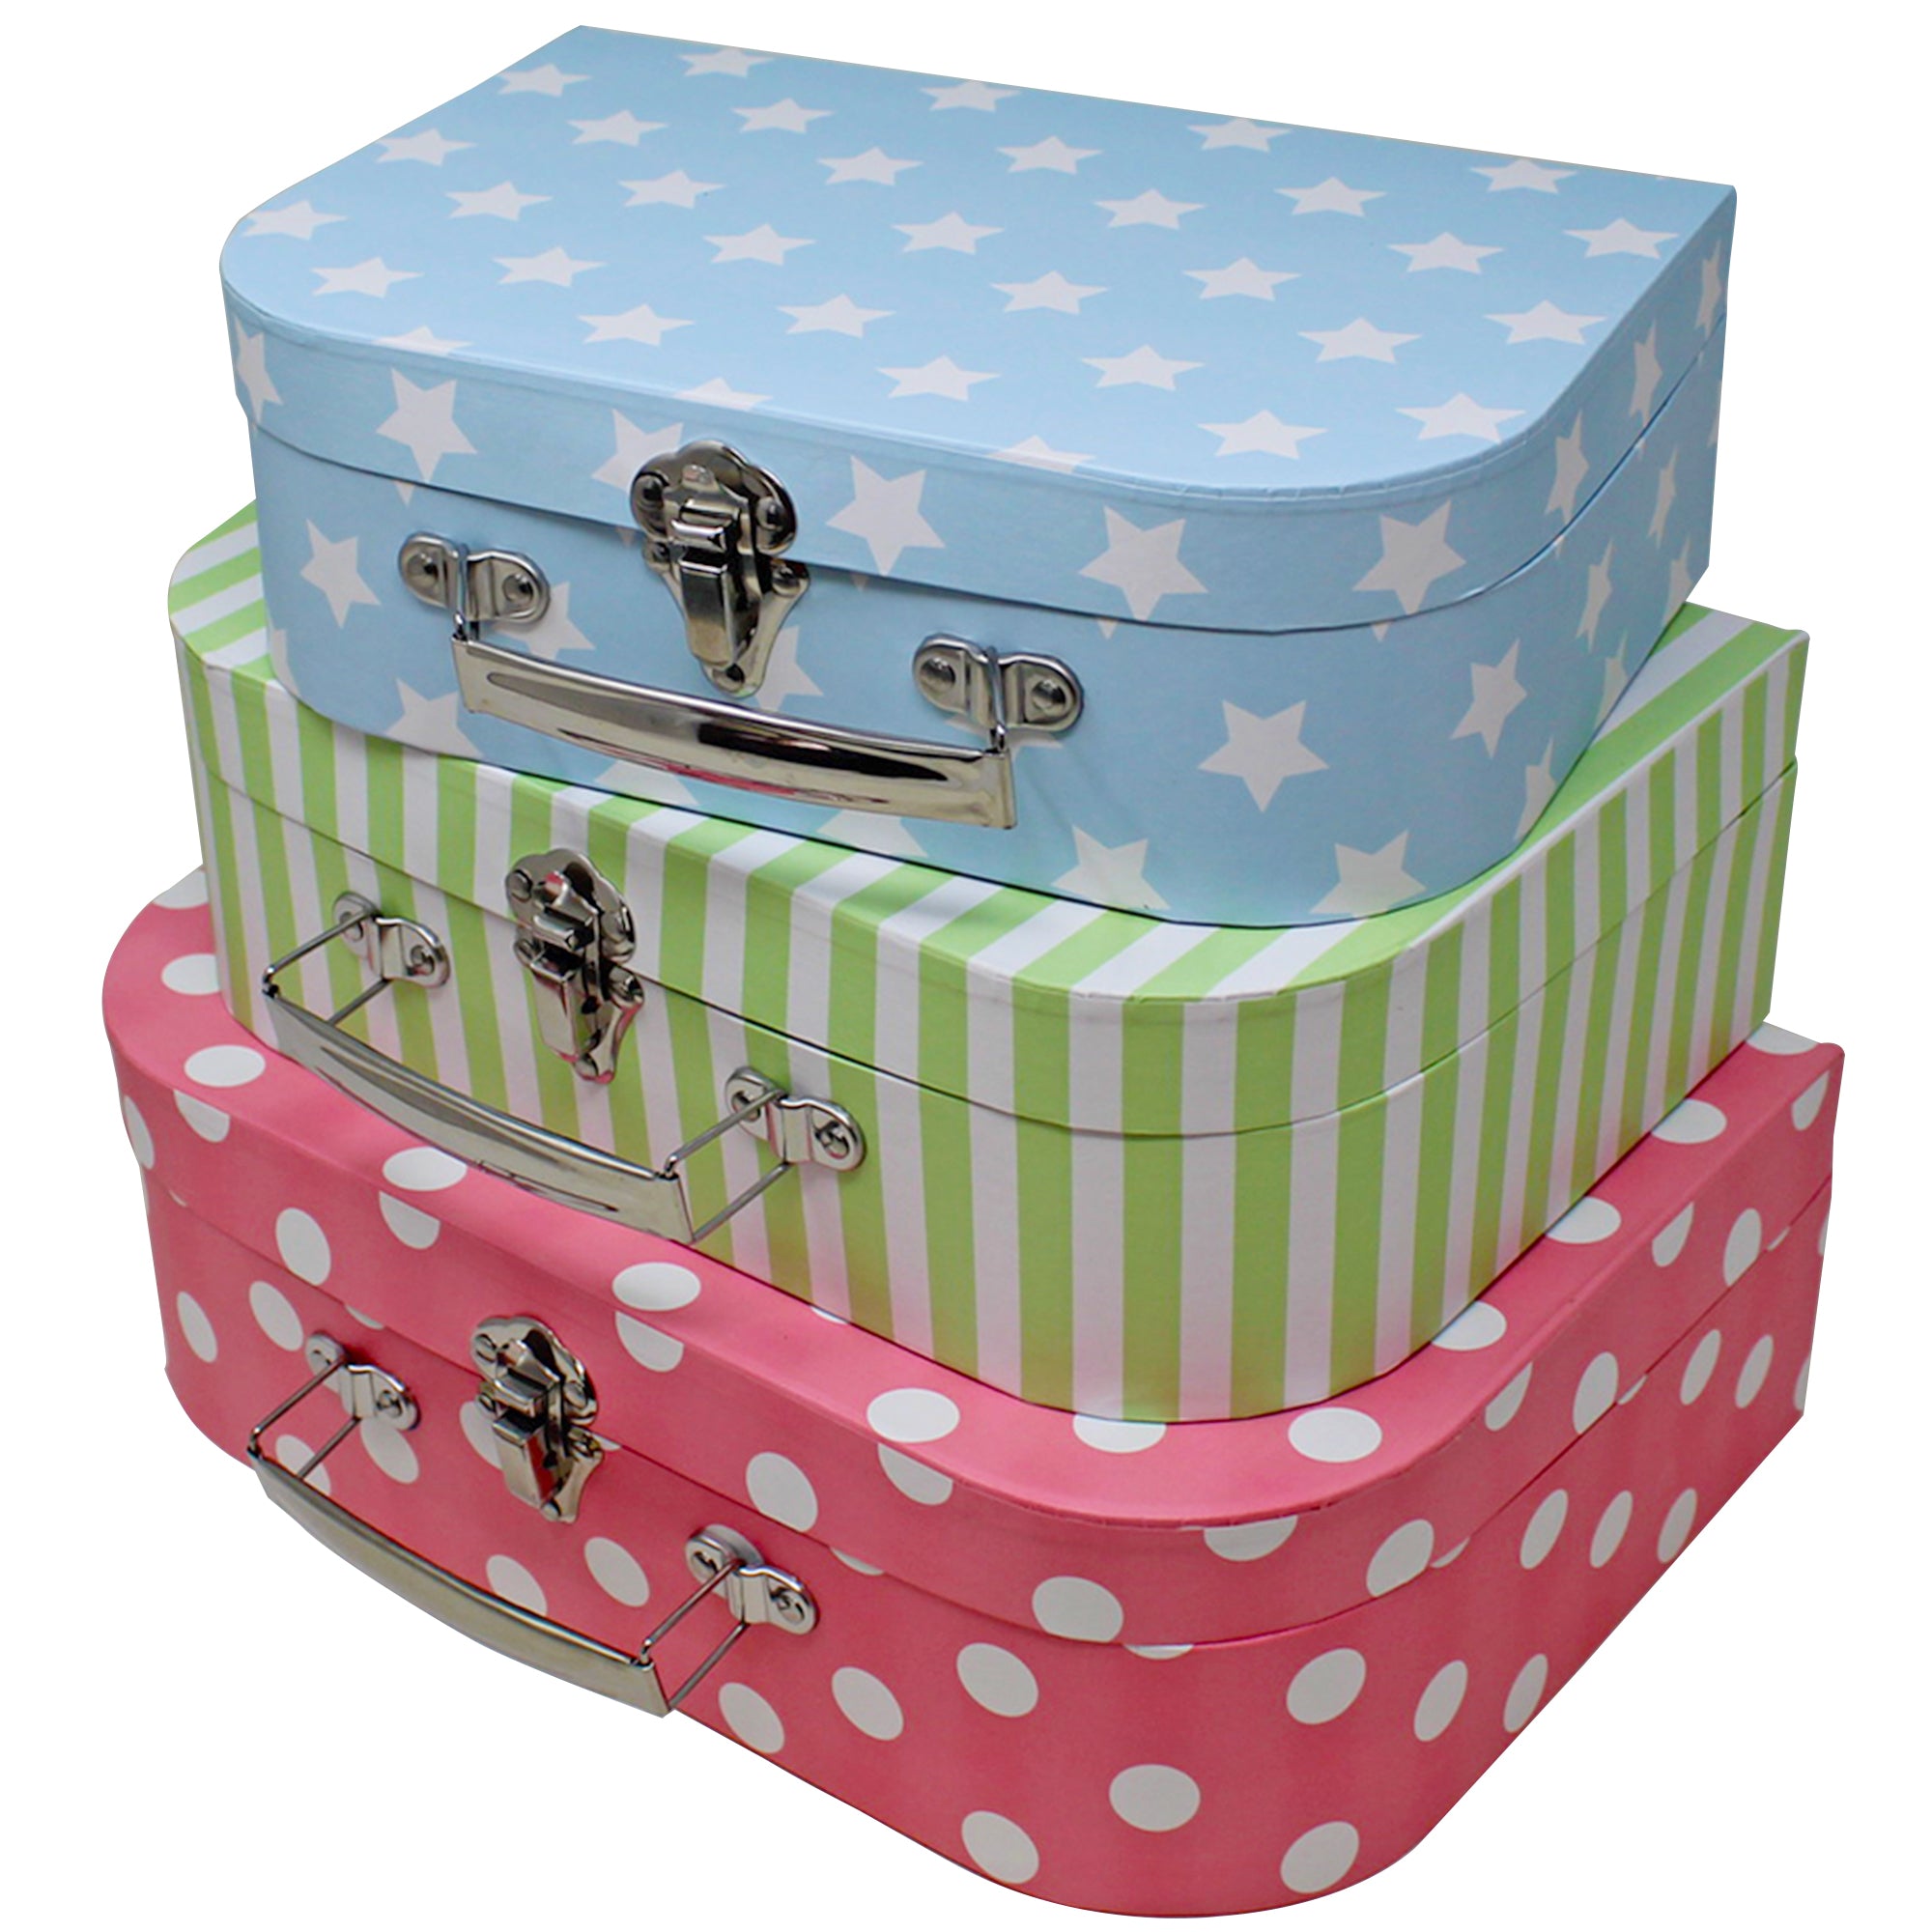 Treasure Chests - 3 sizes (3 Pack)